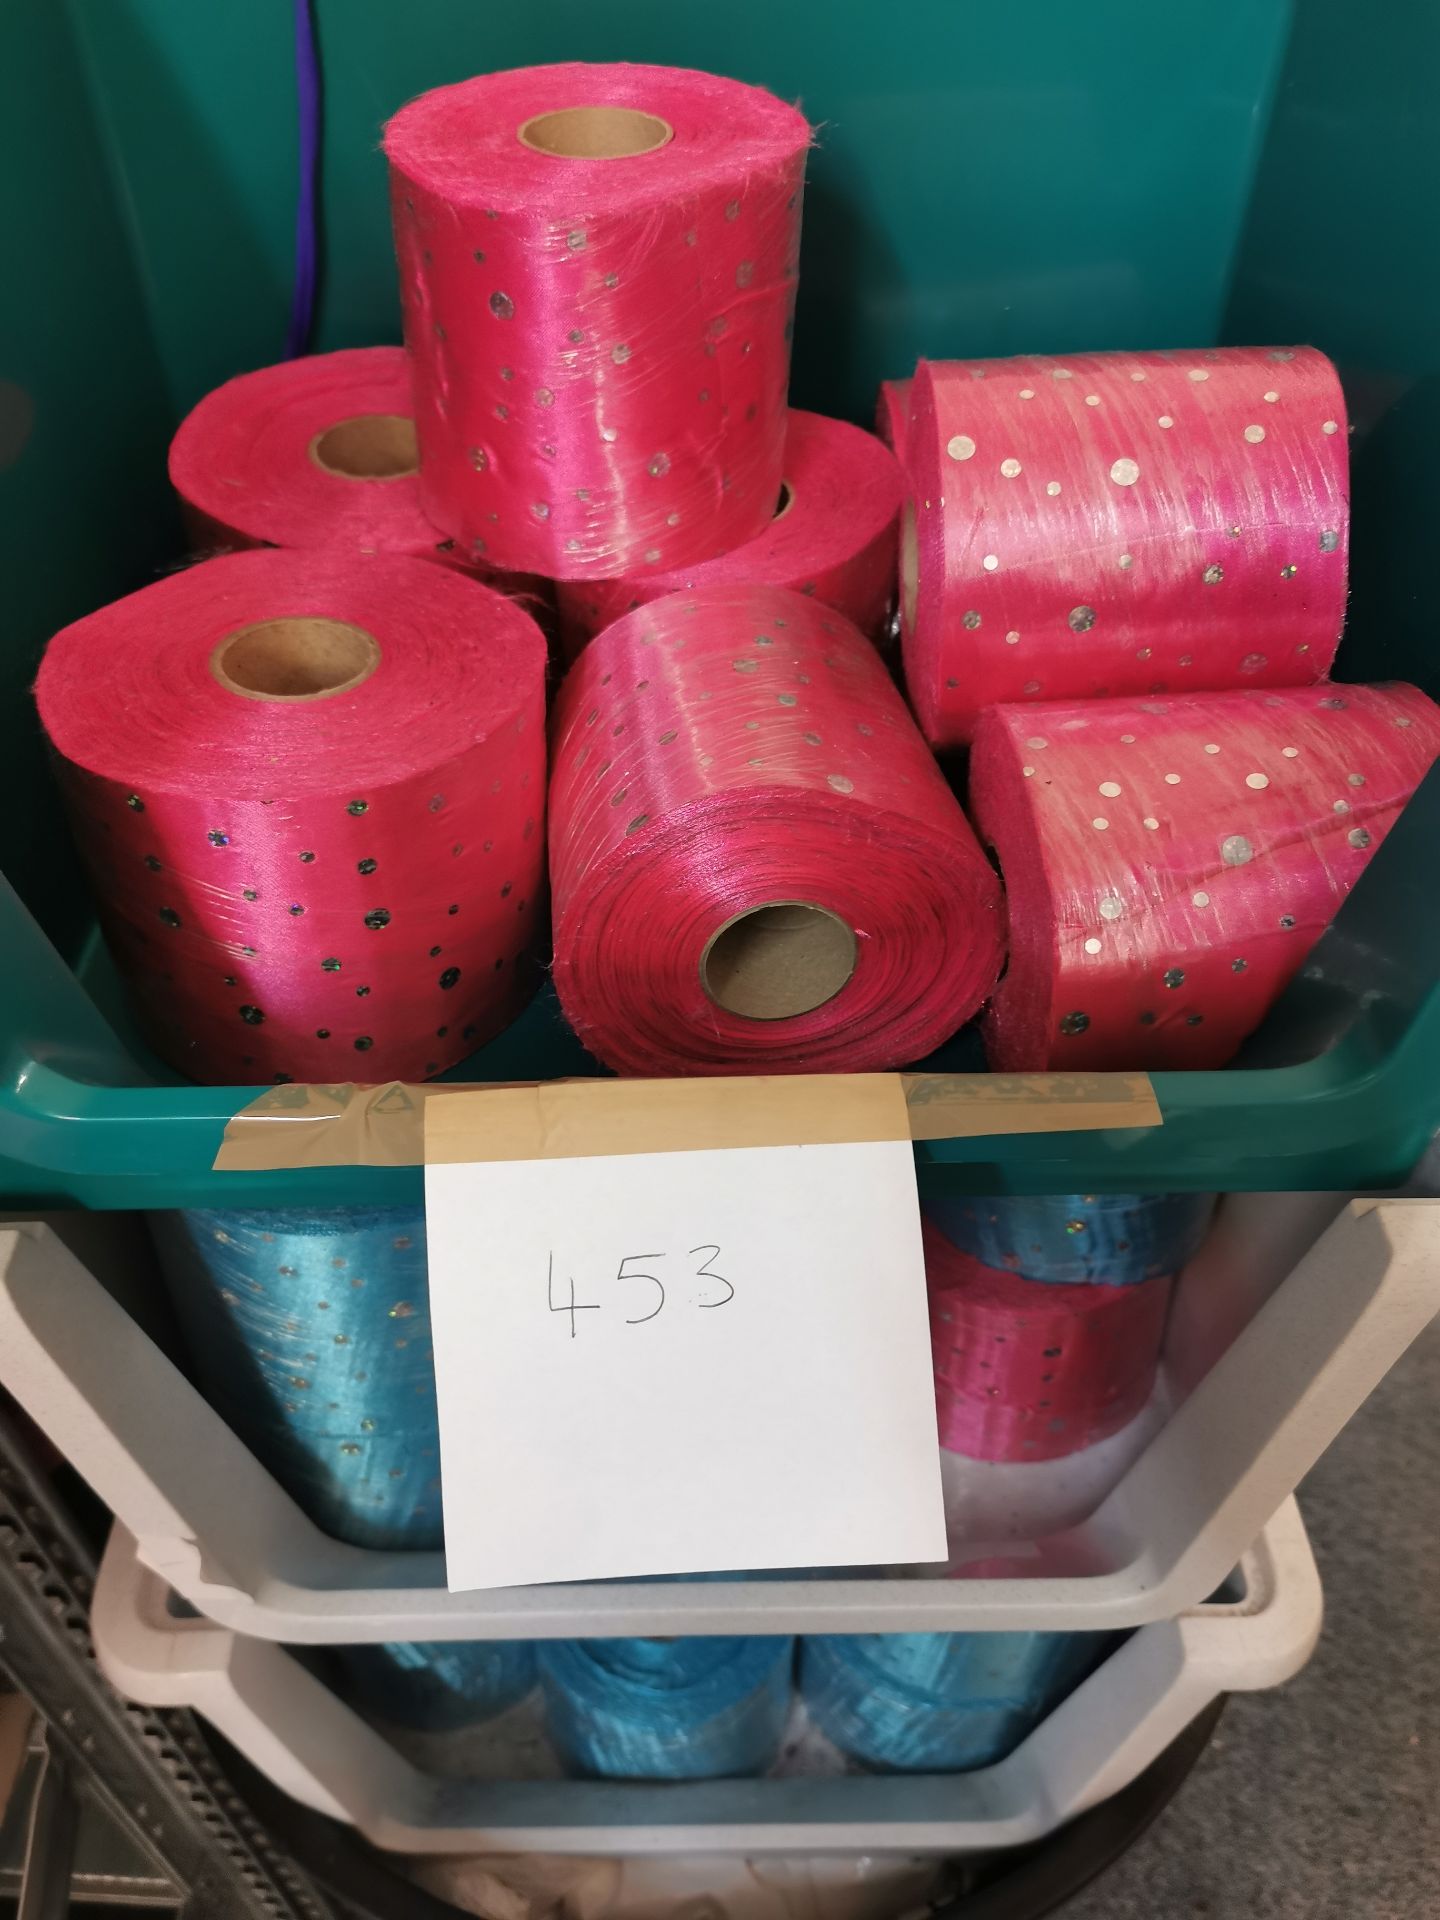 33x Sequin fabric rolls in pink and blue